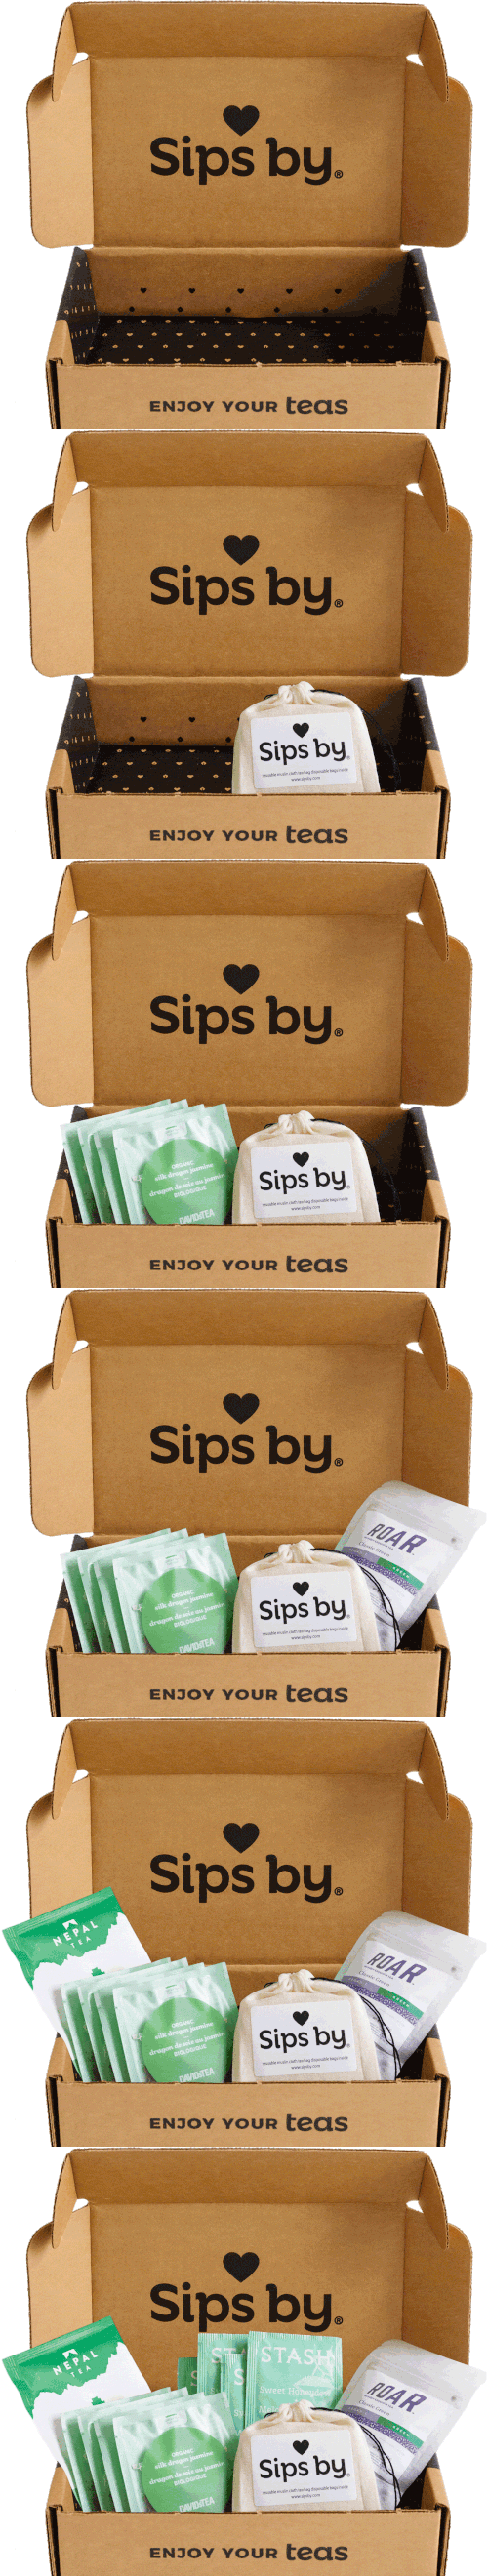 Sips by Box filled with tea samples